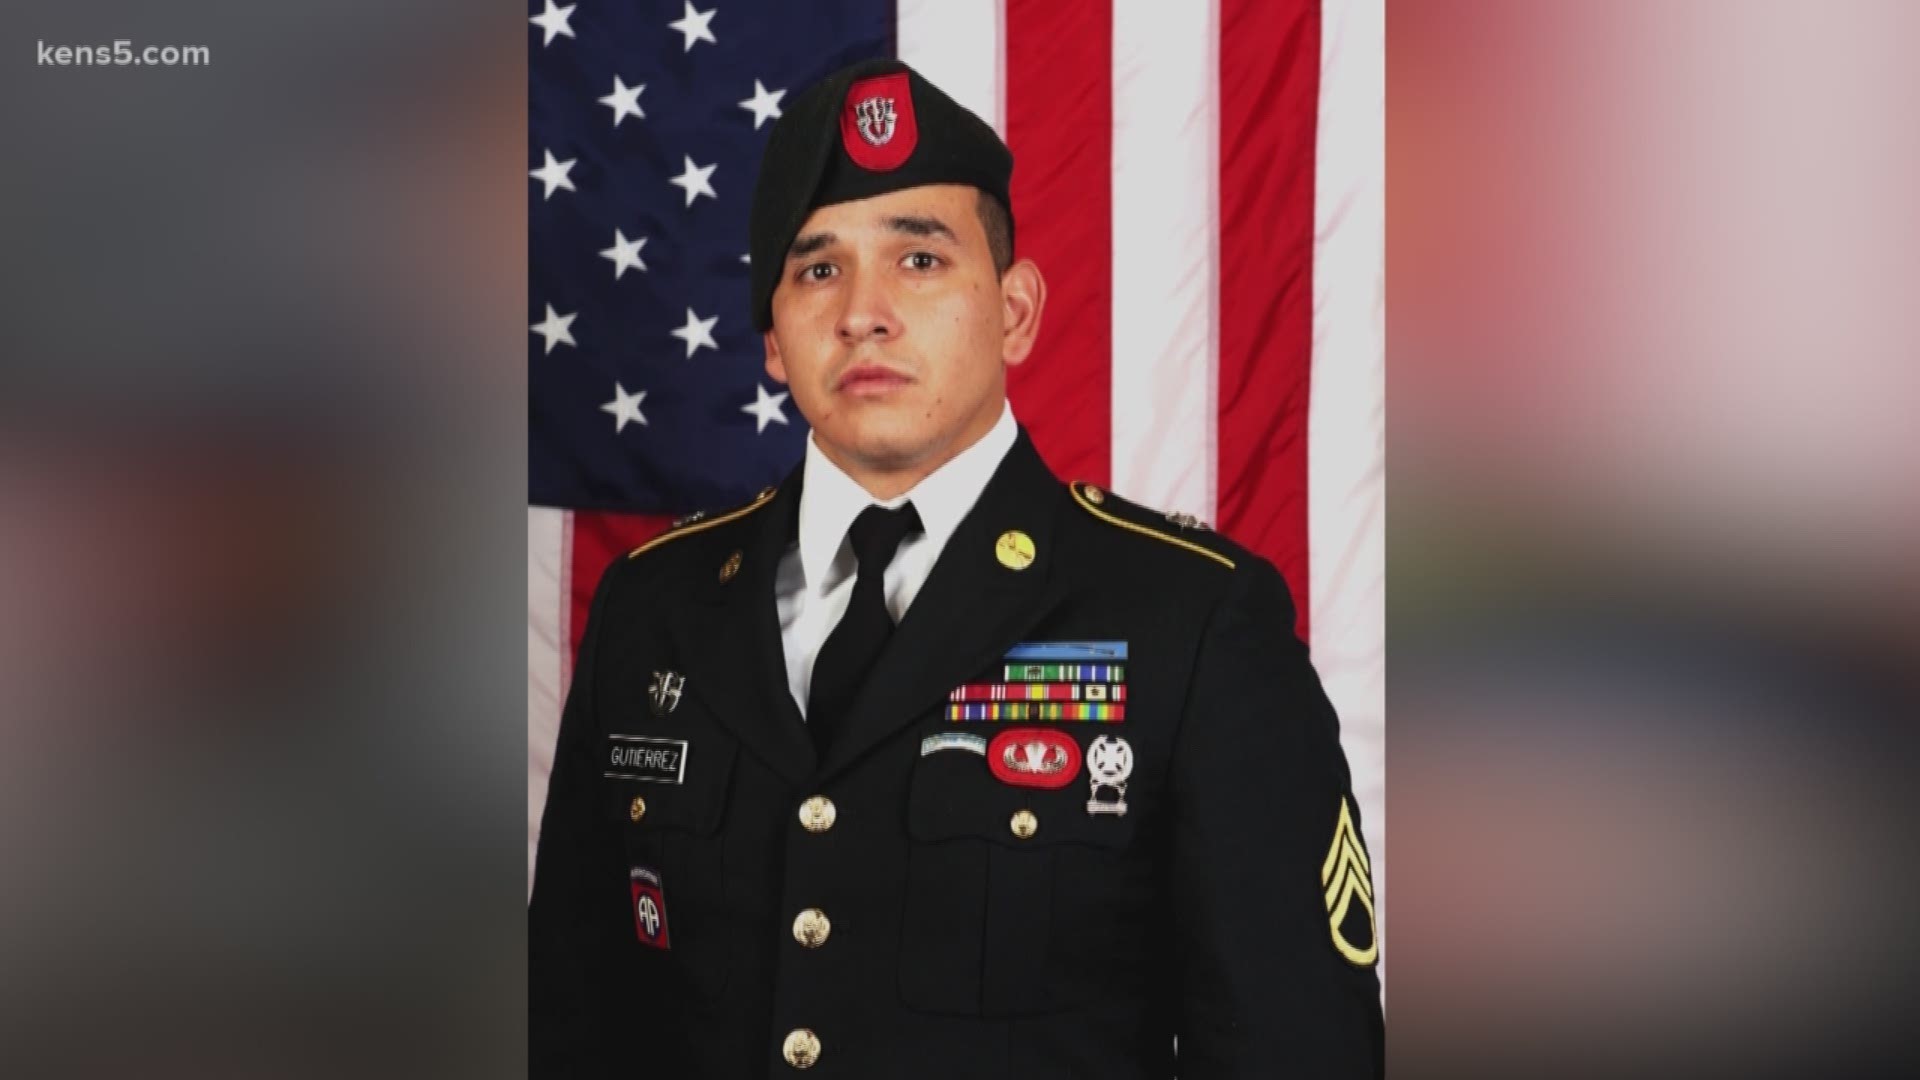 28-year-old Javier Gutierrez was killed Saturday after a firefight broke out in Afghanistan.